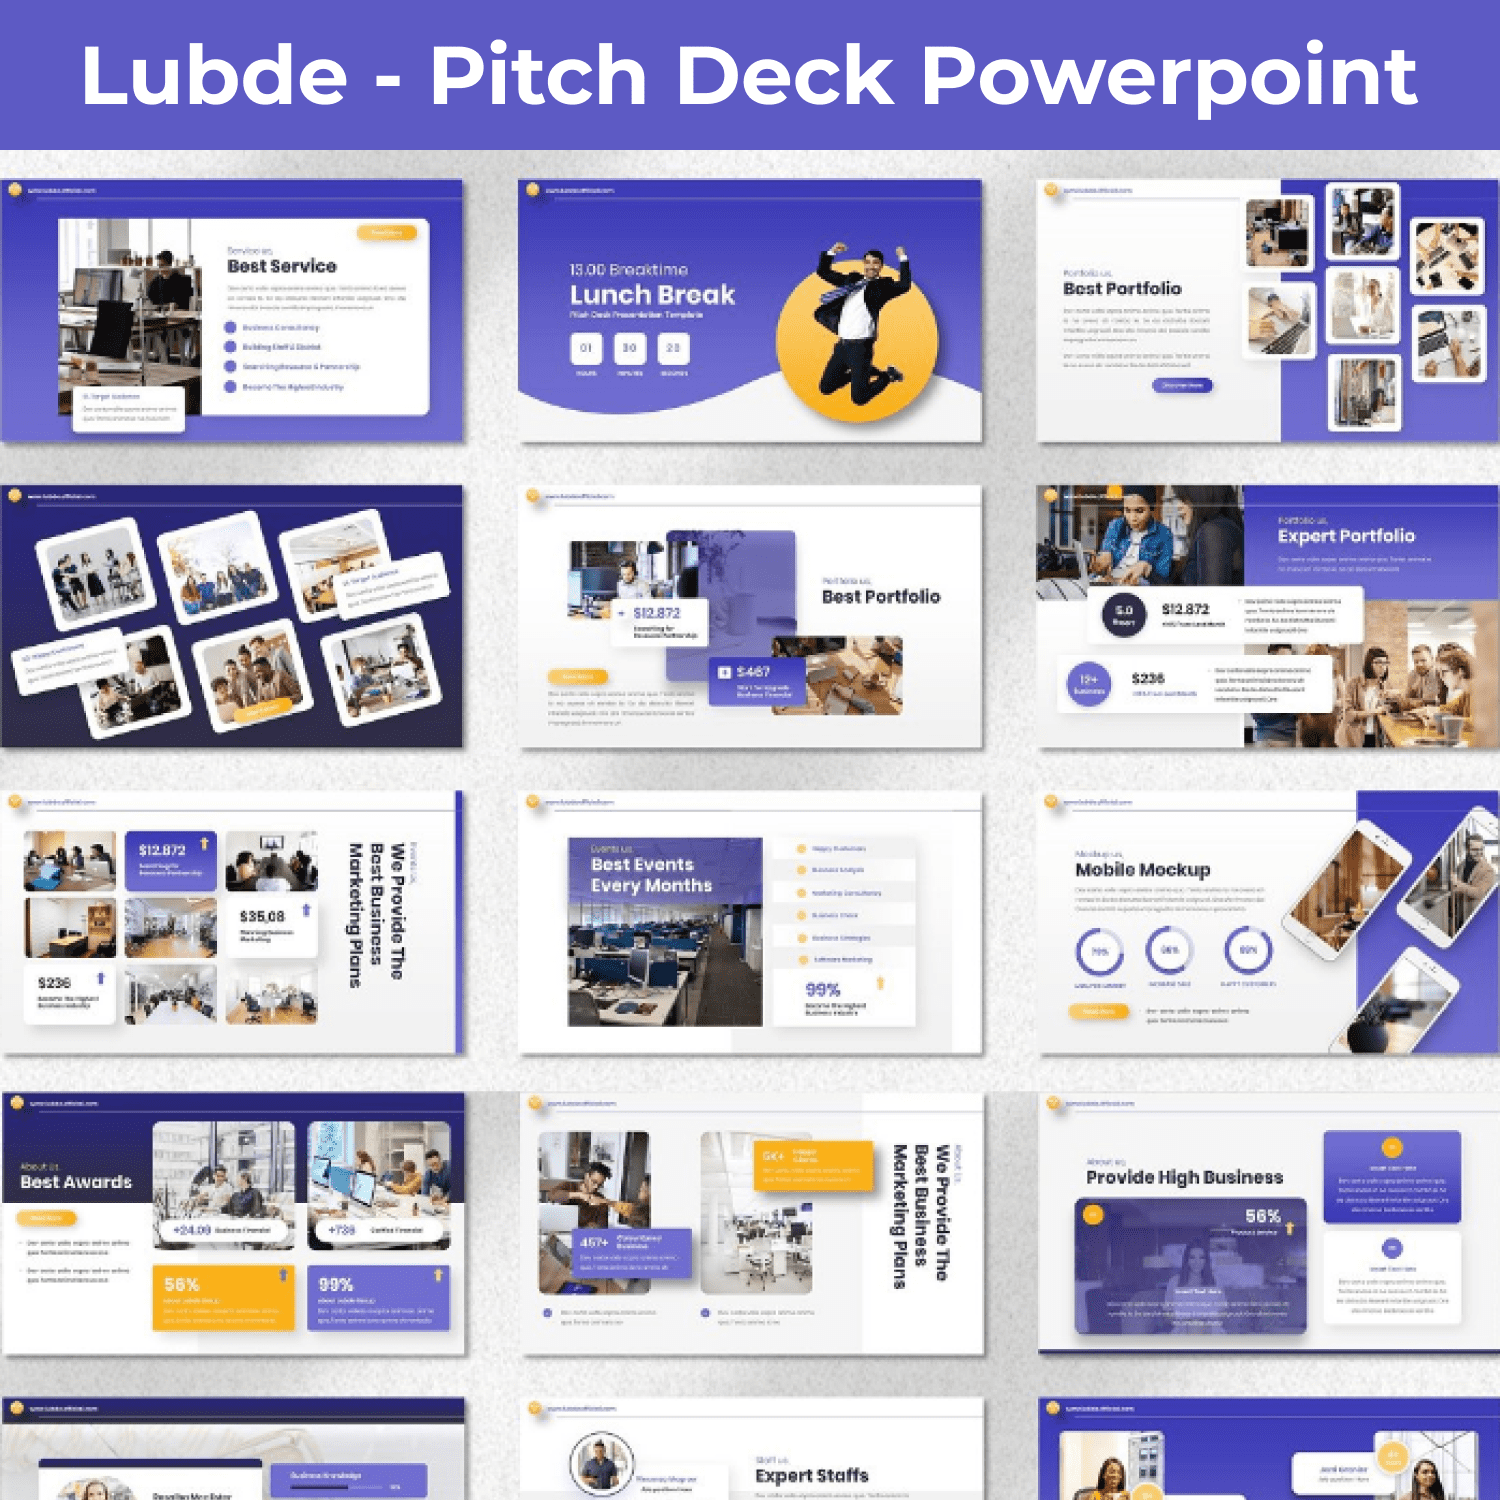 Lubde - Pitch Deck Powerpoint main cover.